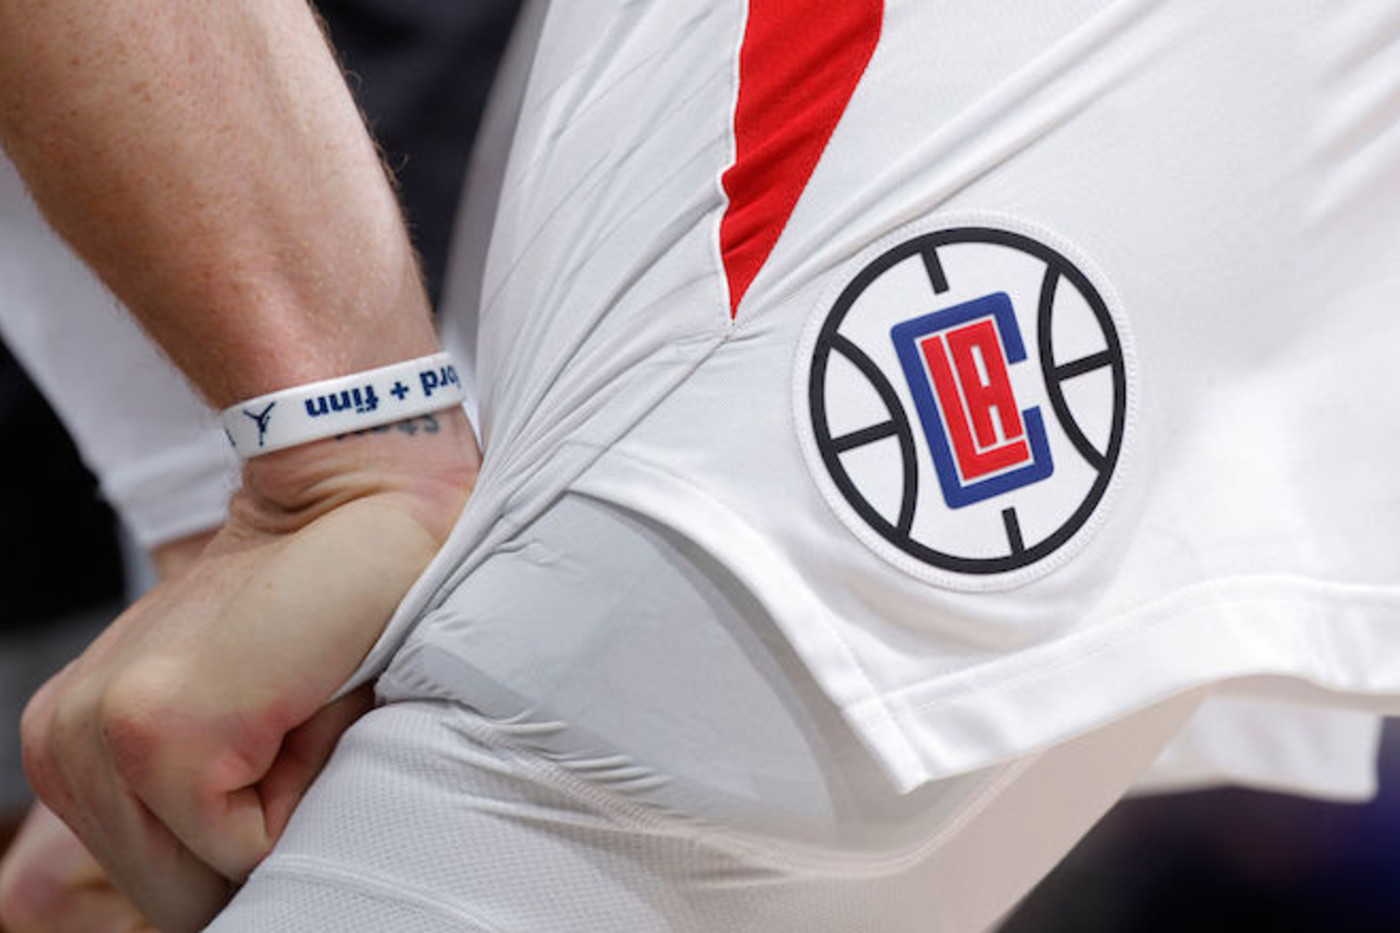 la clippers bumble jersey